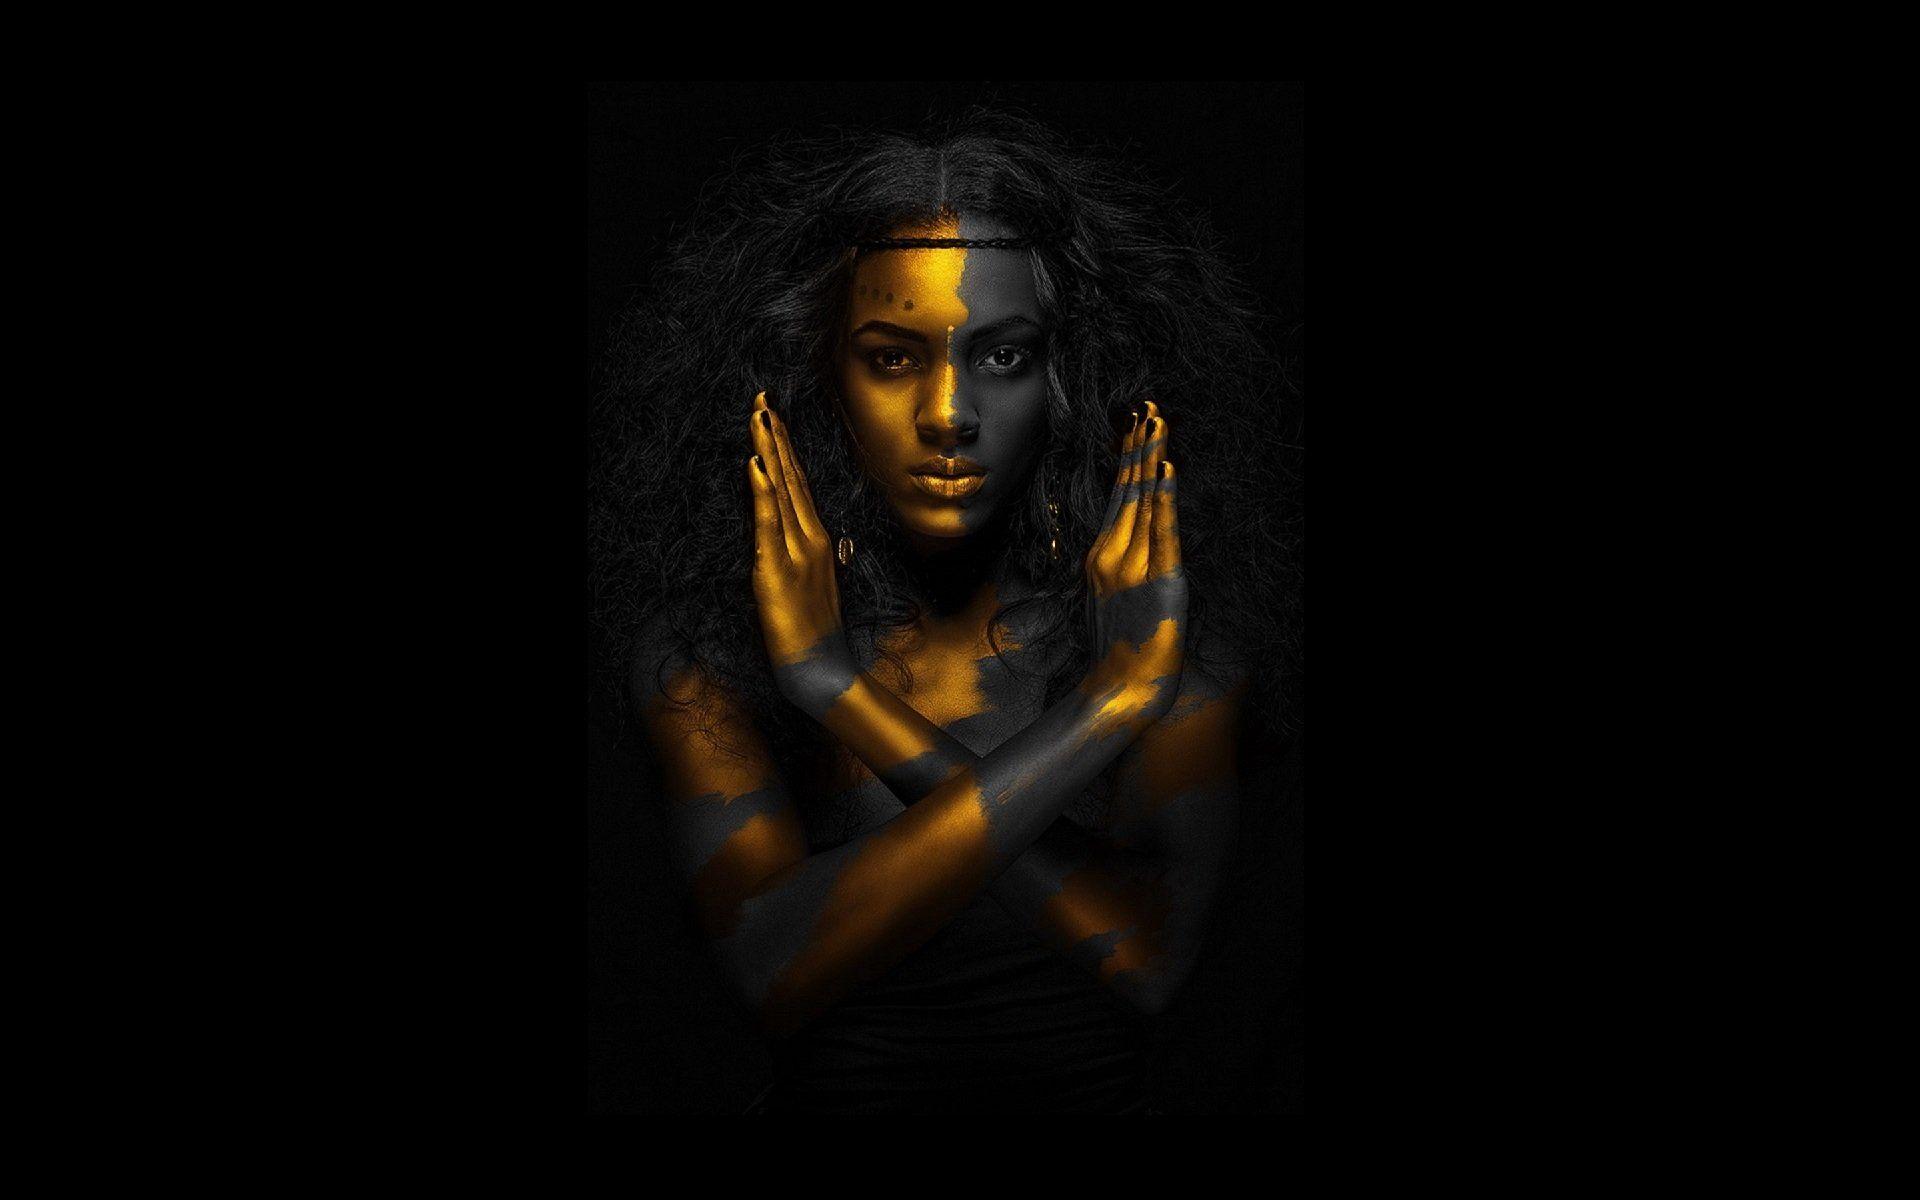 HD Wallpaper Black and Gold High Quality. Wallpaper, Background, Image, Art Photo. Black women art, Body painting, Portrait photography